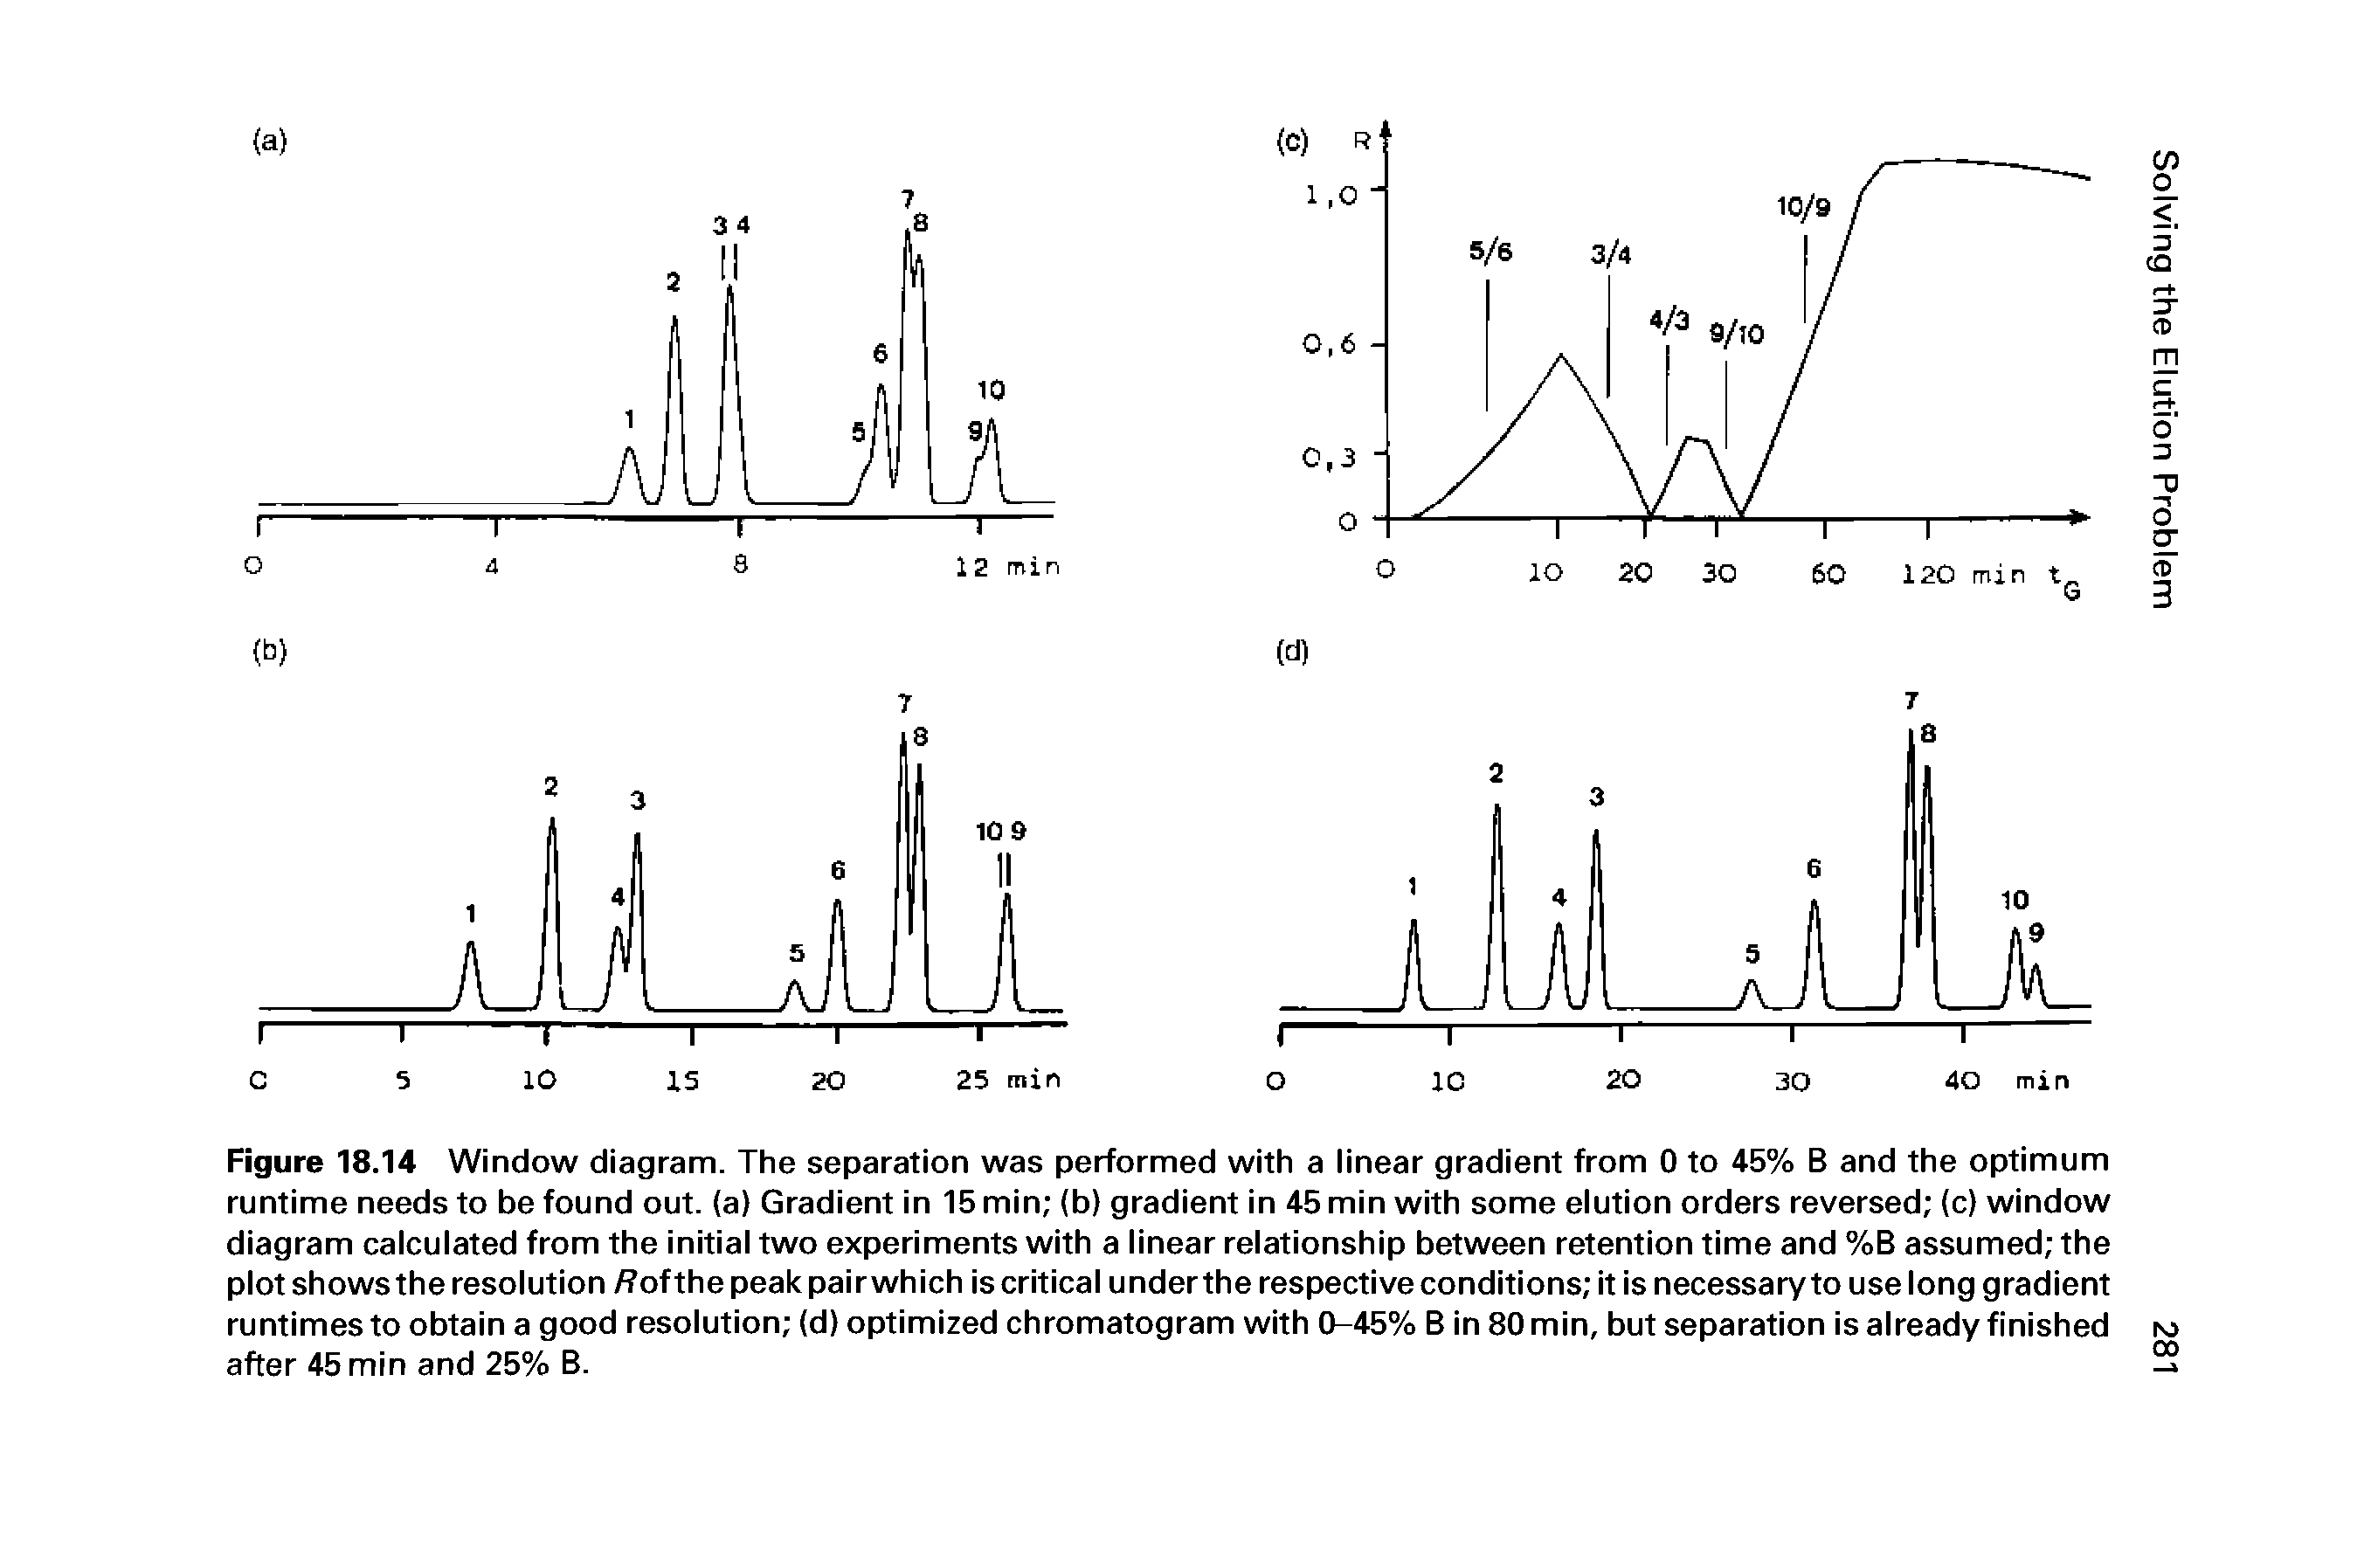 Figure 18.14 Window diagram. The separation was performed with a linear gradient from 0 to 45% B and the optimum runtime needs to be found out. (a) Gradient in 15 min (b) gradient in 45 min with some elution orders reversed (c) window diagram calculated from the initial two experiments with a linear relationship between retention time and %B assumed the plot shows the resolution / of the peak pair which is critical under the respective conditions it is necessary to use long gradient runtimes to obtain a good resolution (d) optimized chromatogram with 0-45% B in 80 min, but separation is already finished after 45 min and 25% B.